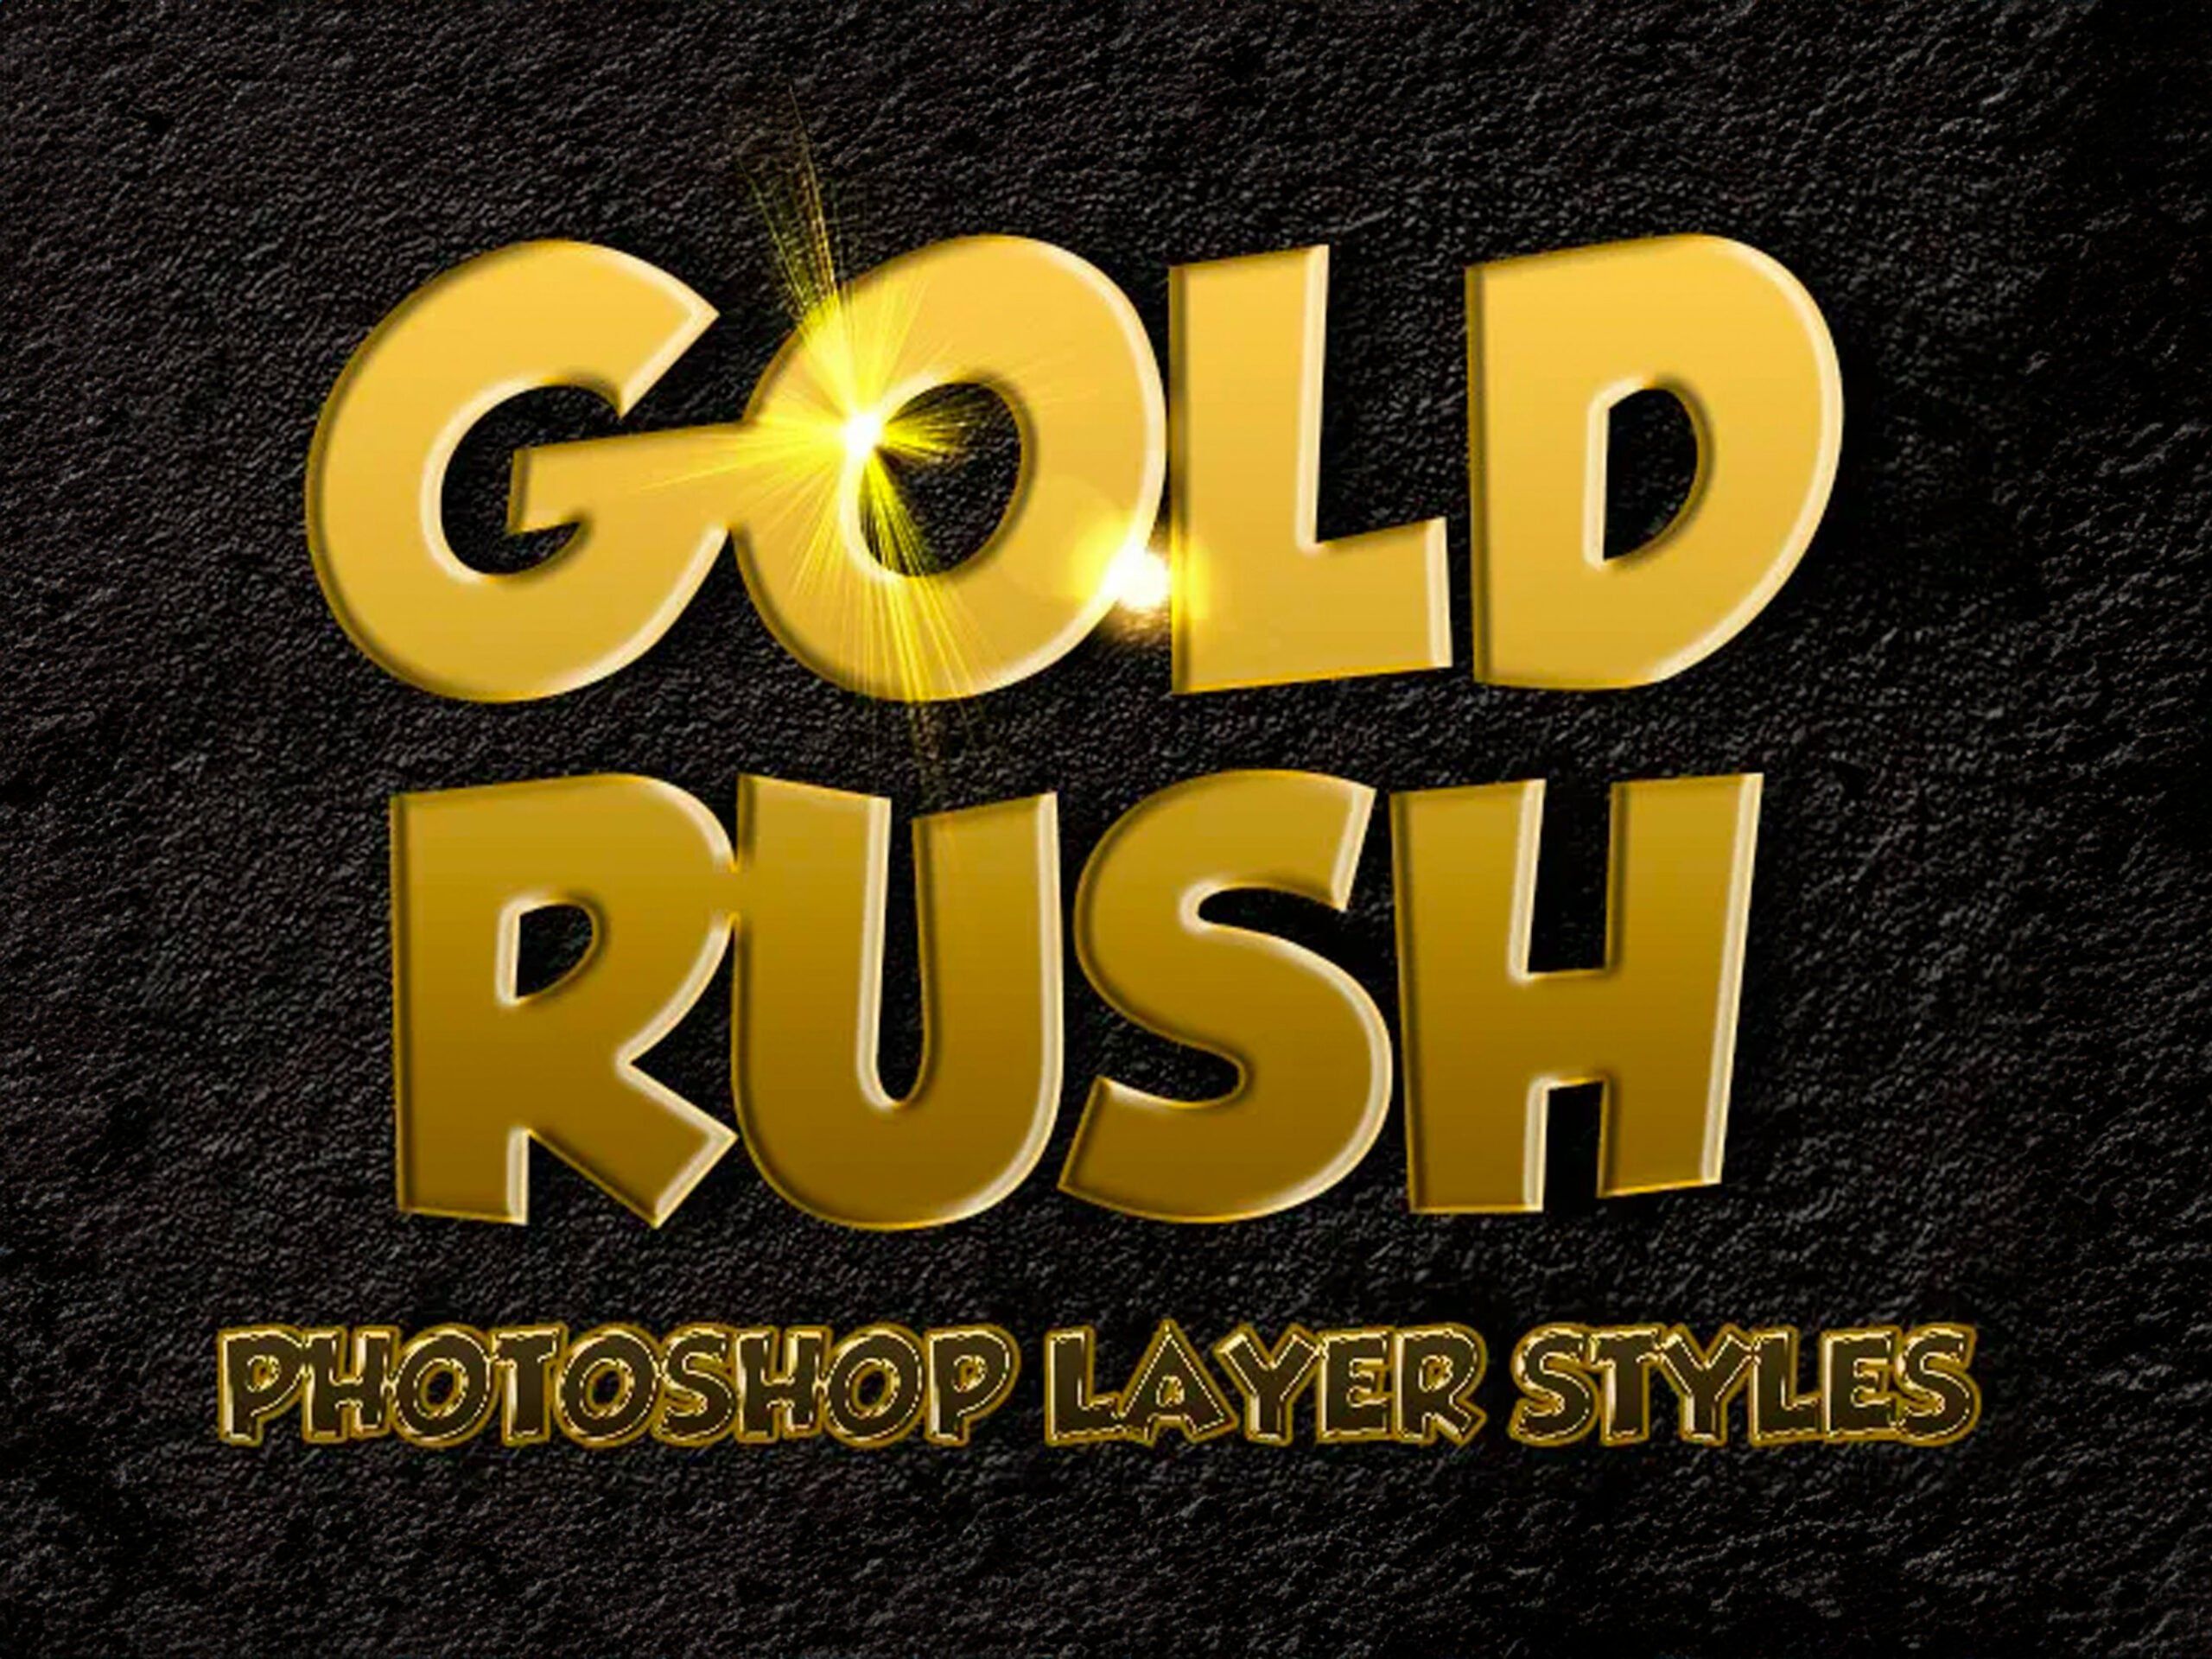 Gold Rush Photoshop Layer Styles